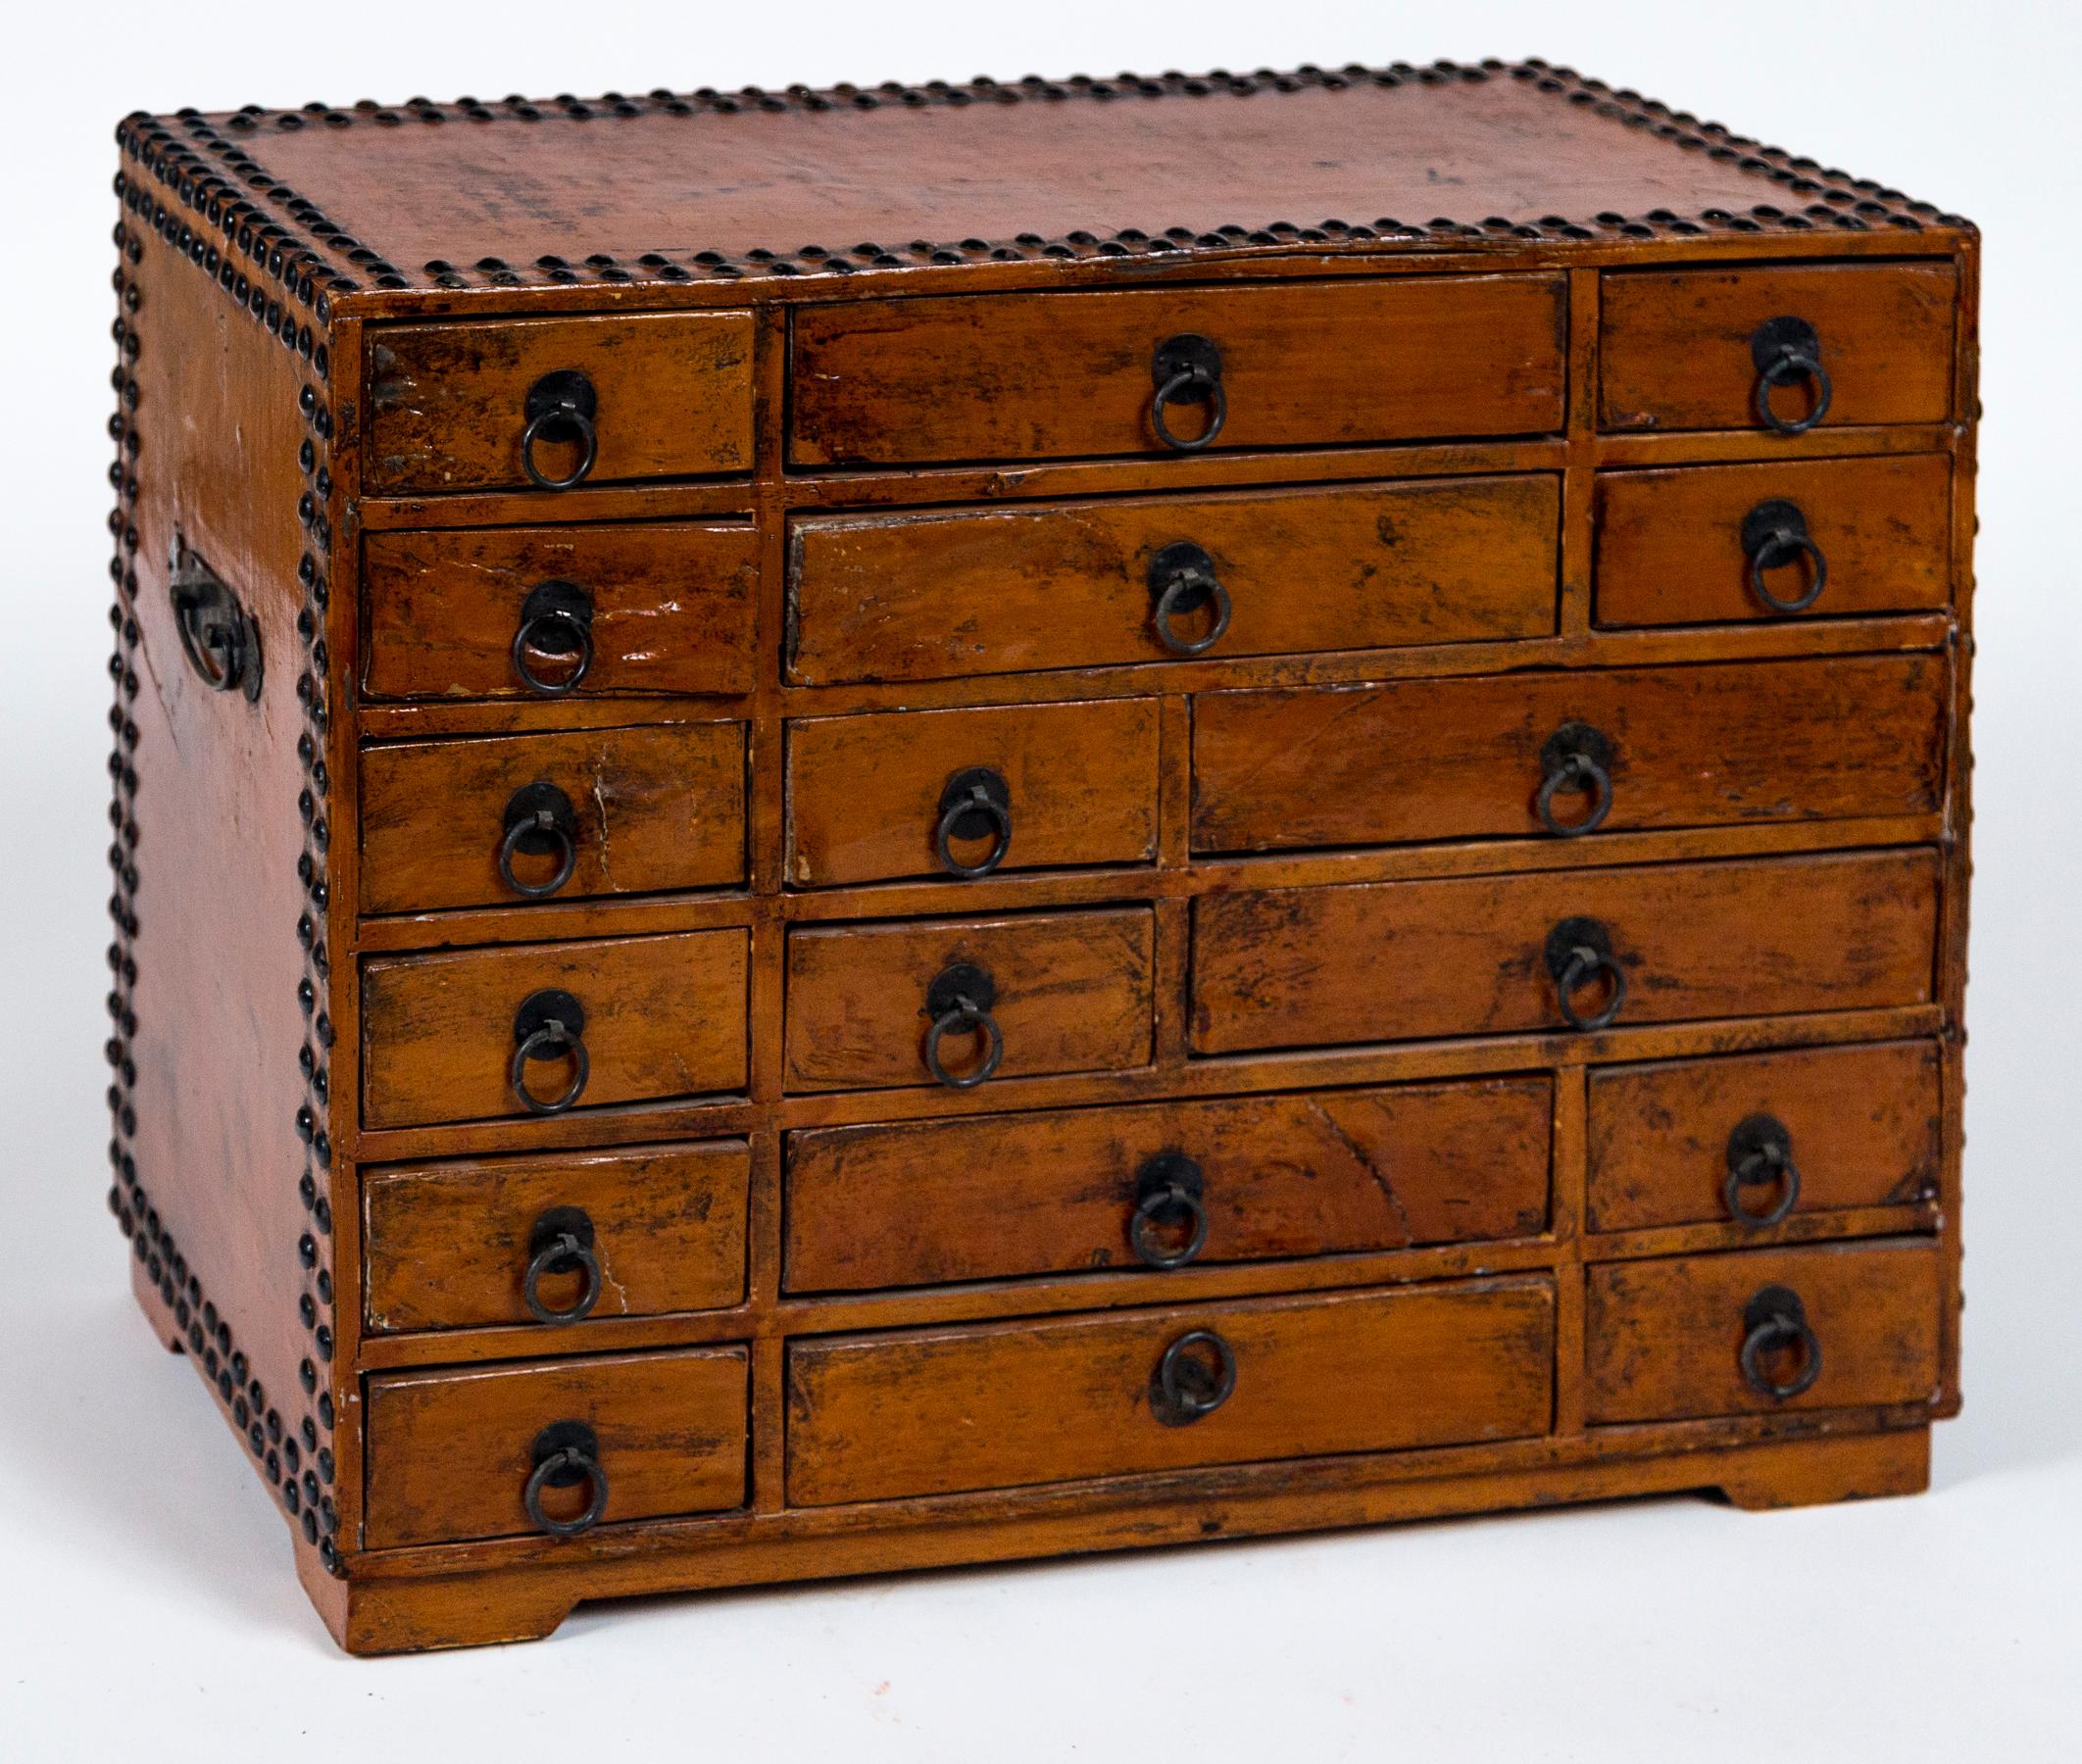 Vintage Asian Apothecary Chest, 20th Century. Chest has a narrow footed base, and 18 fabric lined drawers with metal pulls. Double rows of nail heads outlining top and sides, with 2 iron handles.